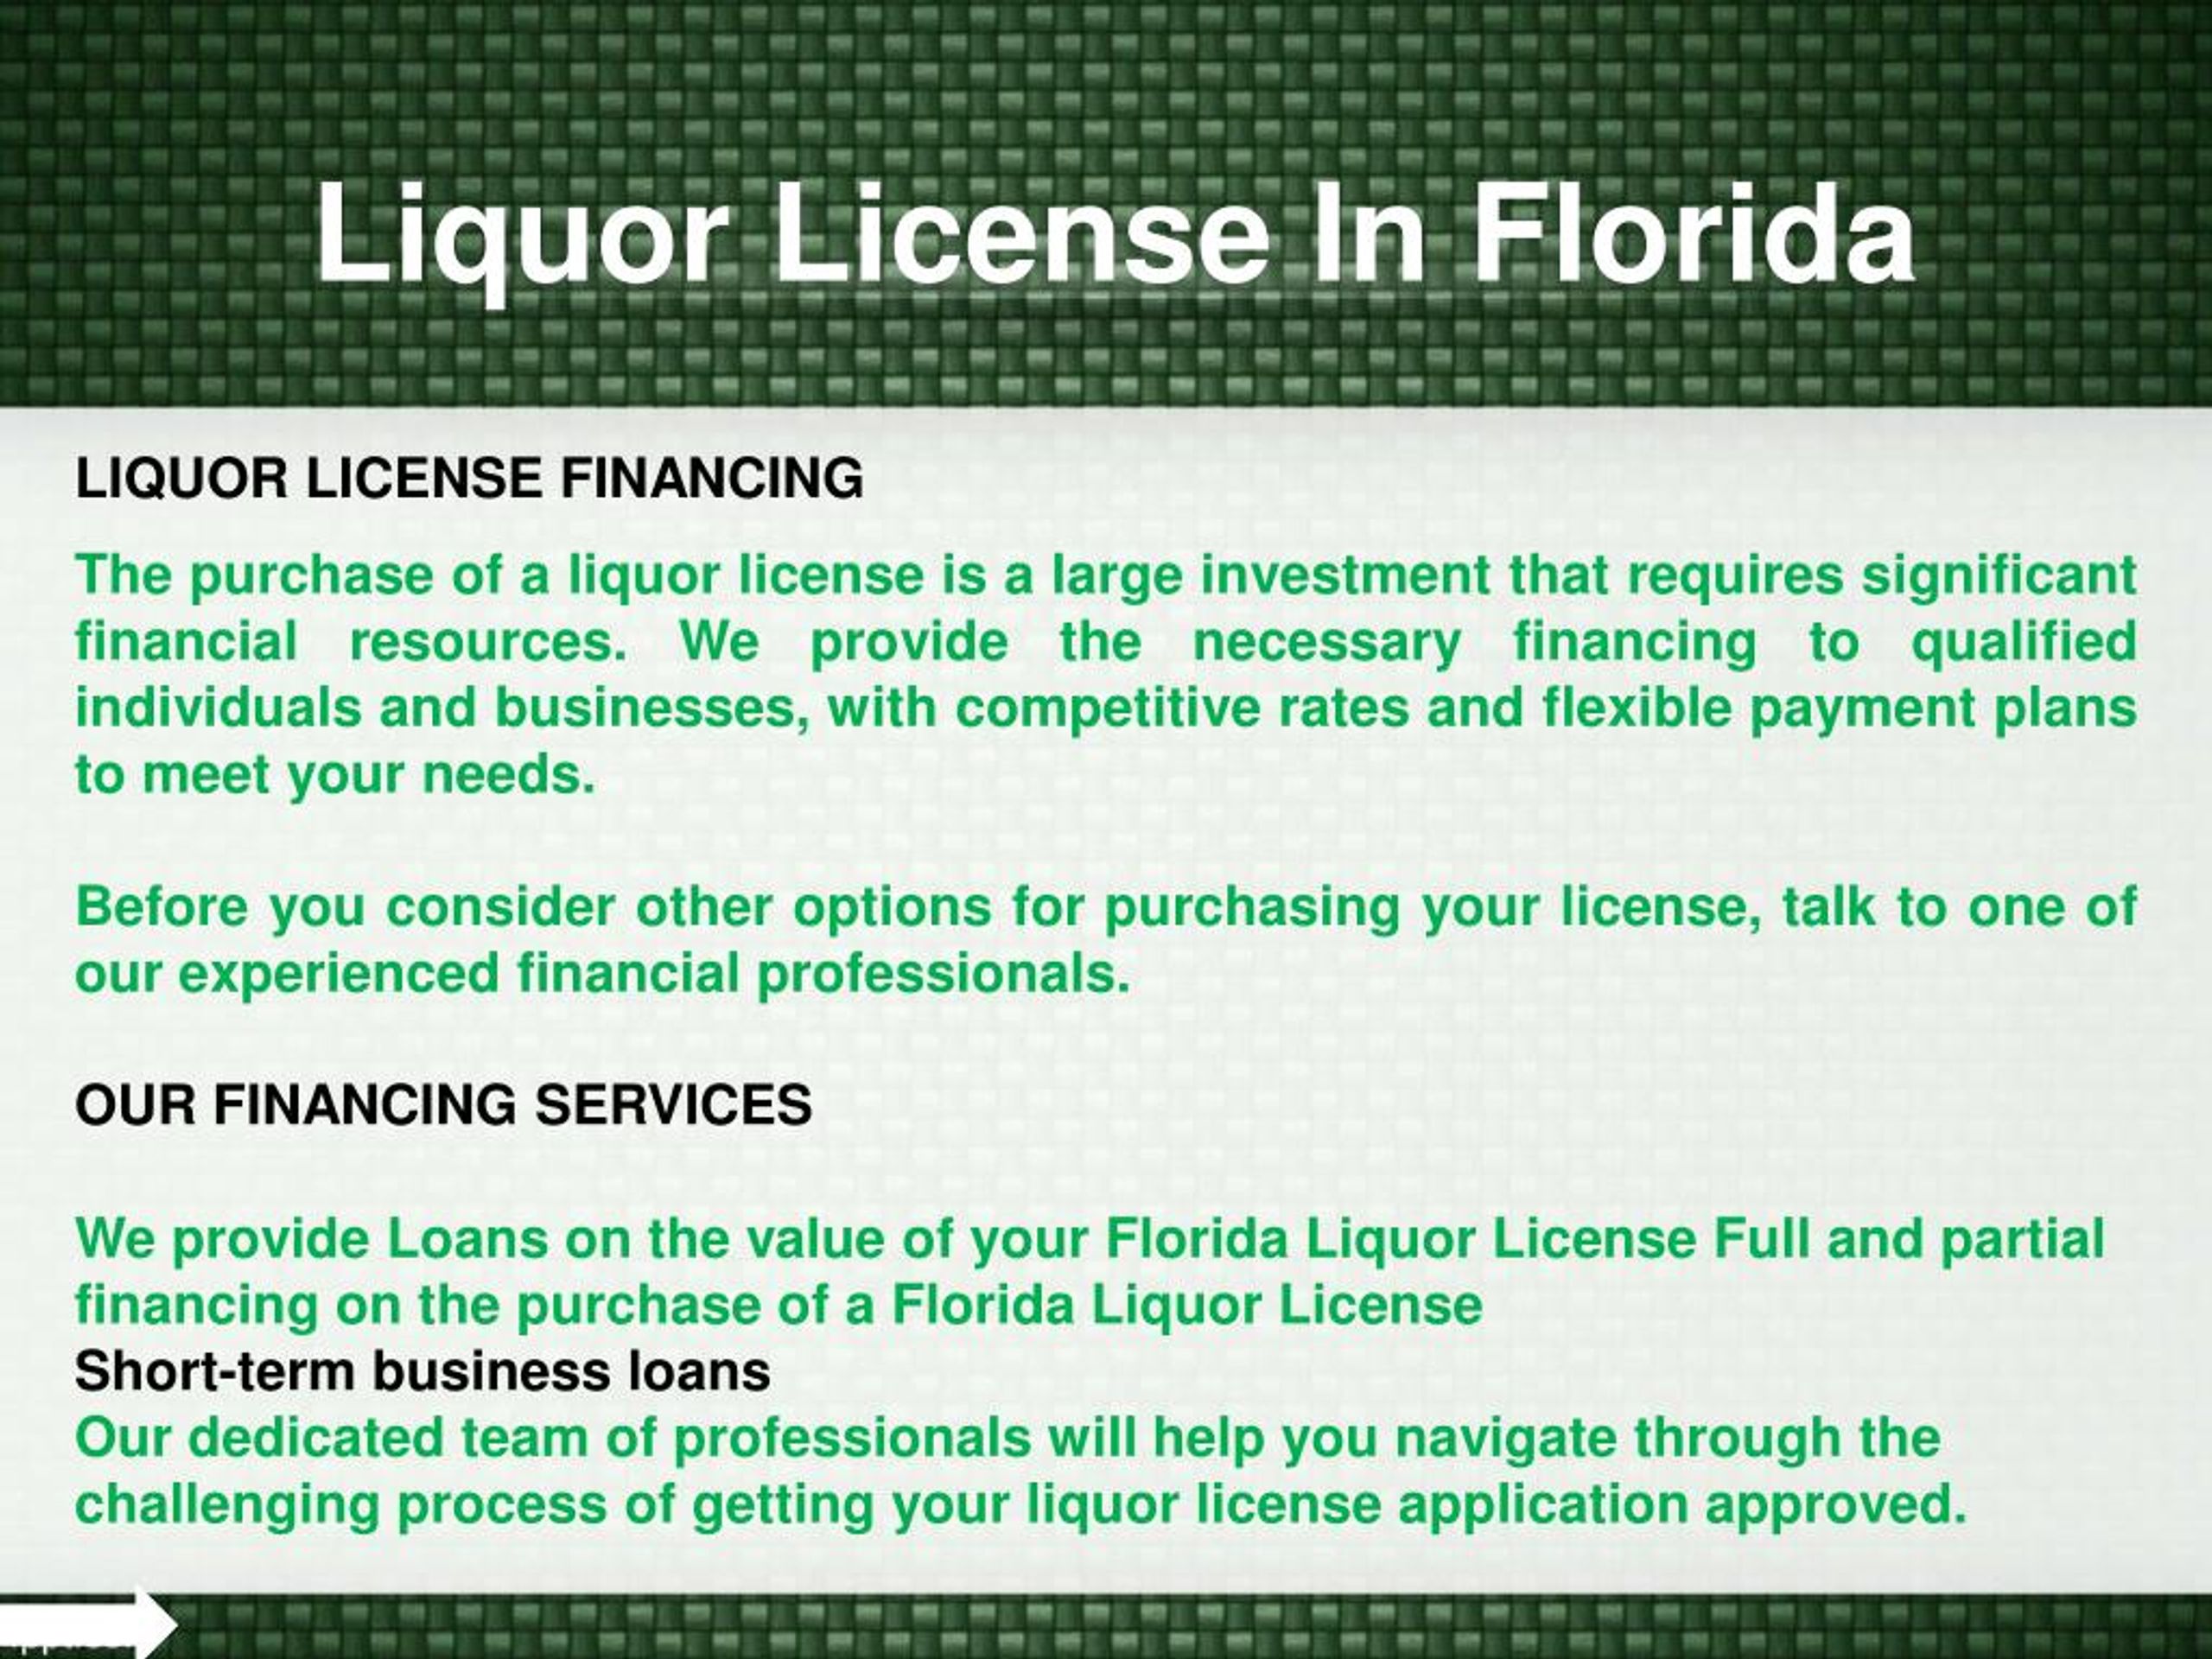 PPT Liquor License In Florida PowerPoint Presentation, free download